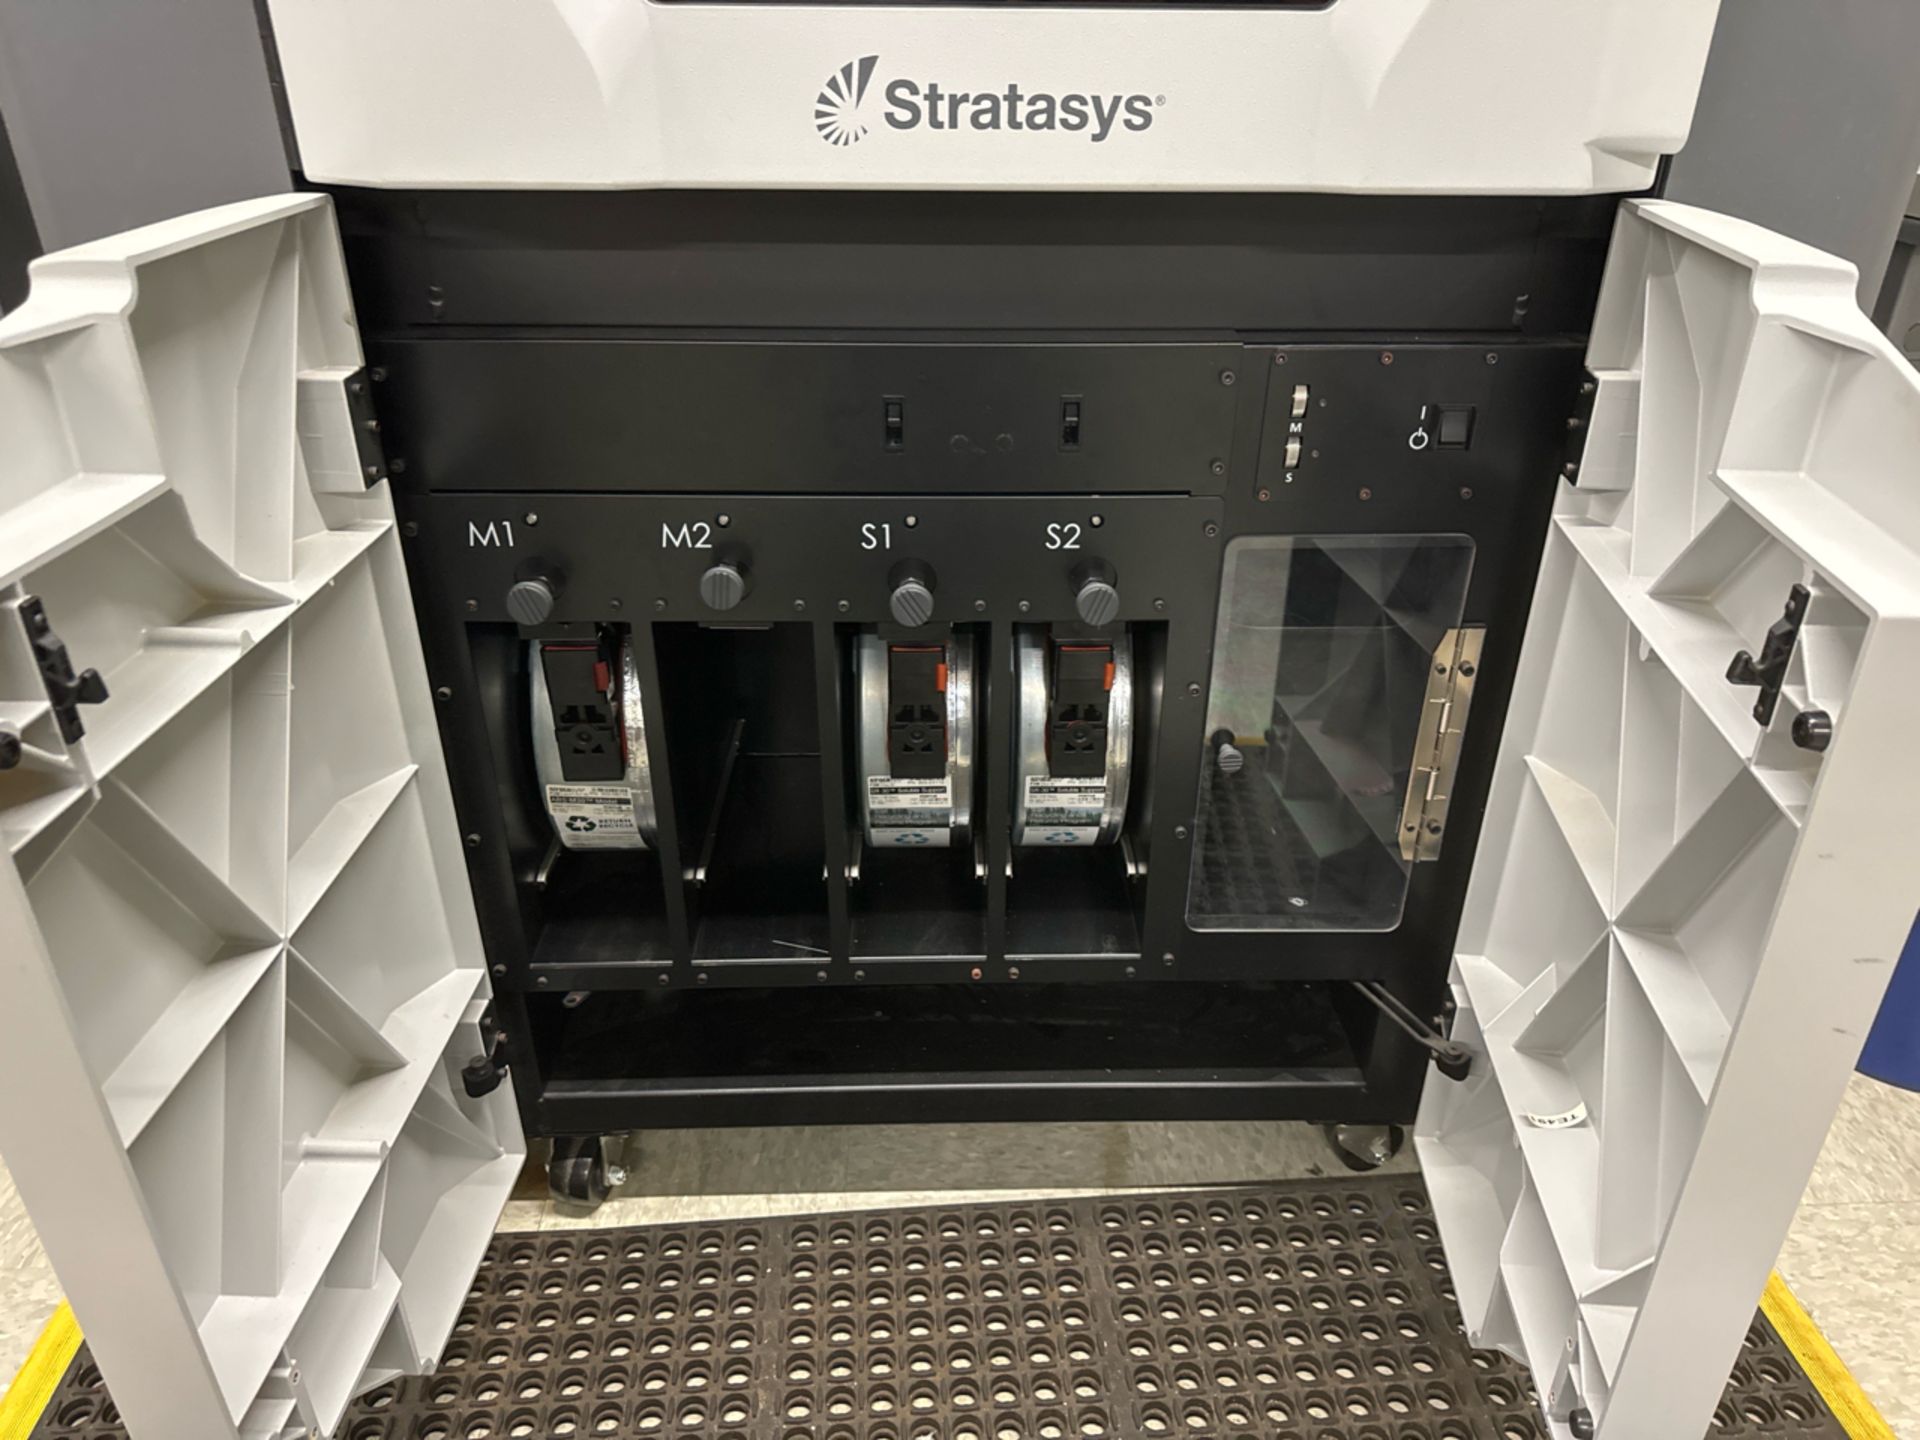 Stratasys Fortus 450mc 3D Production System Printer w/ Contents of Utility Cabinet - Image 14 of 17